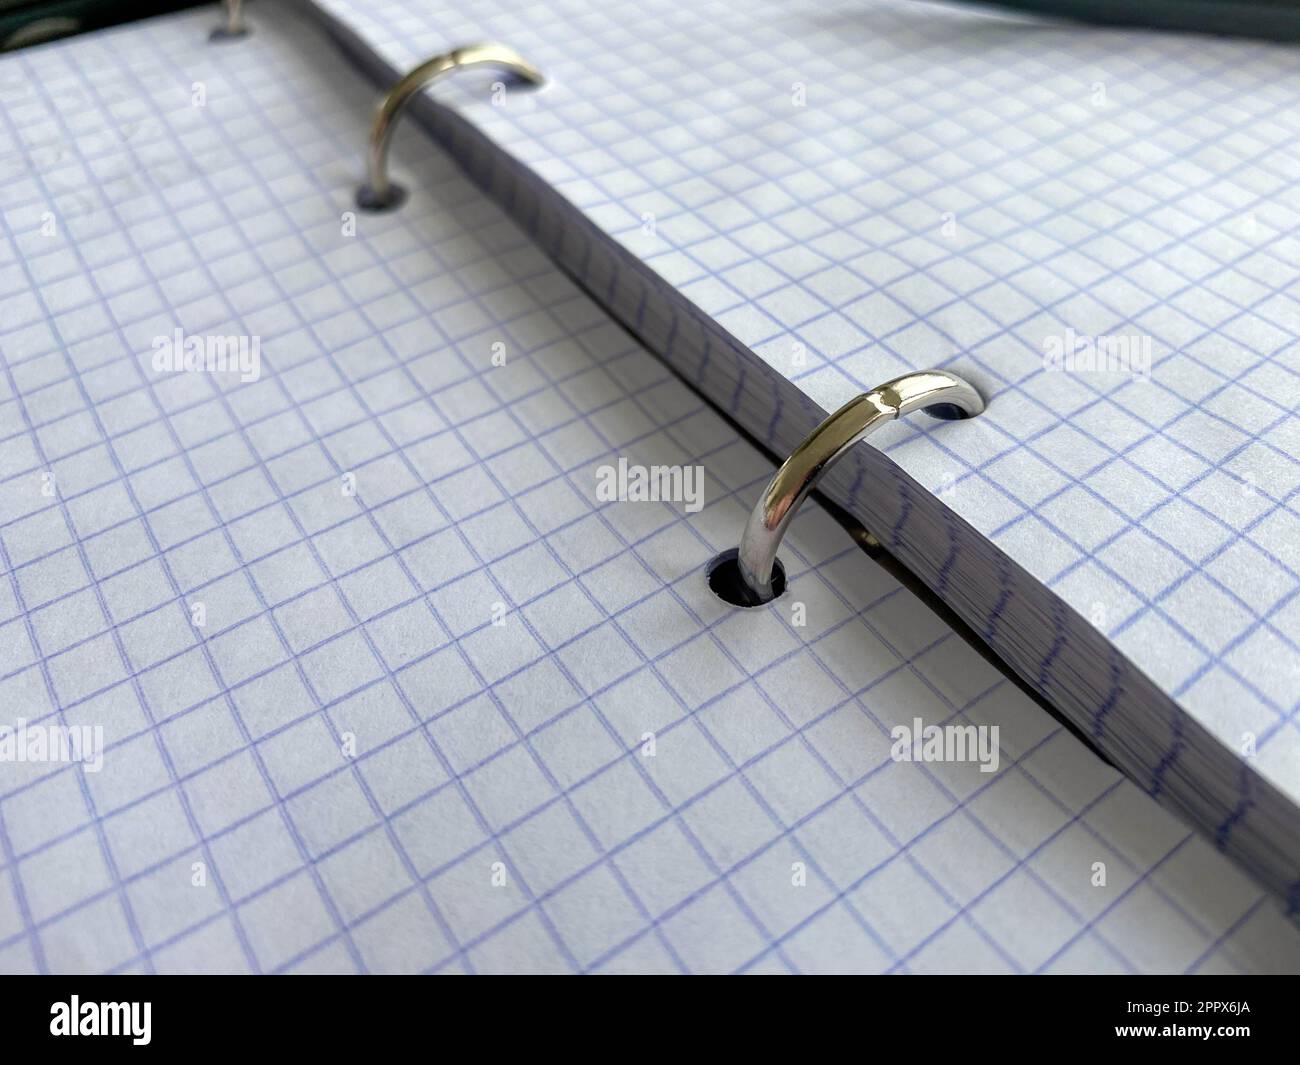 A writing pen rests on a notepad with squared paper sheets on a work desk with stationery in a business office. Stock Photo